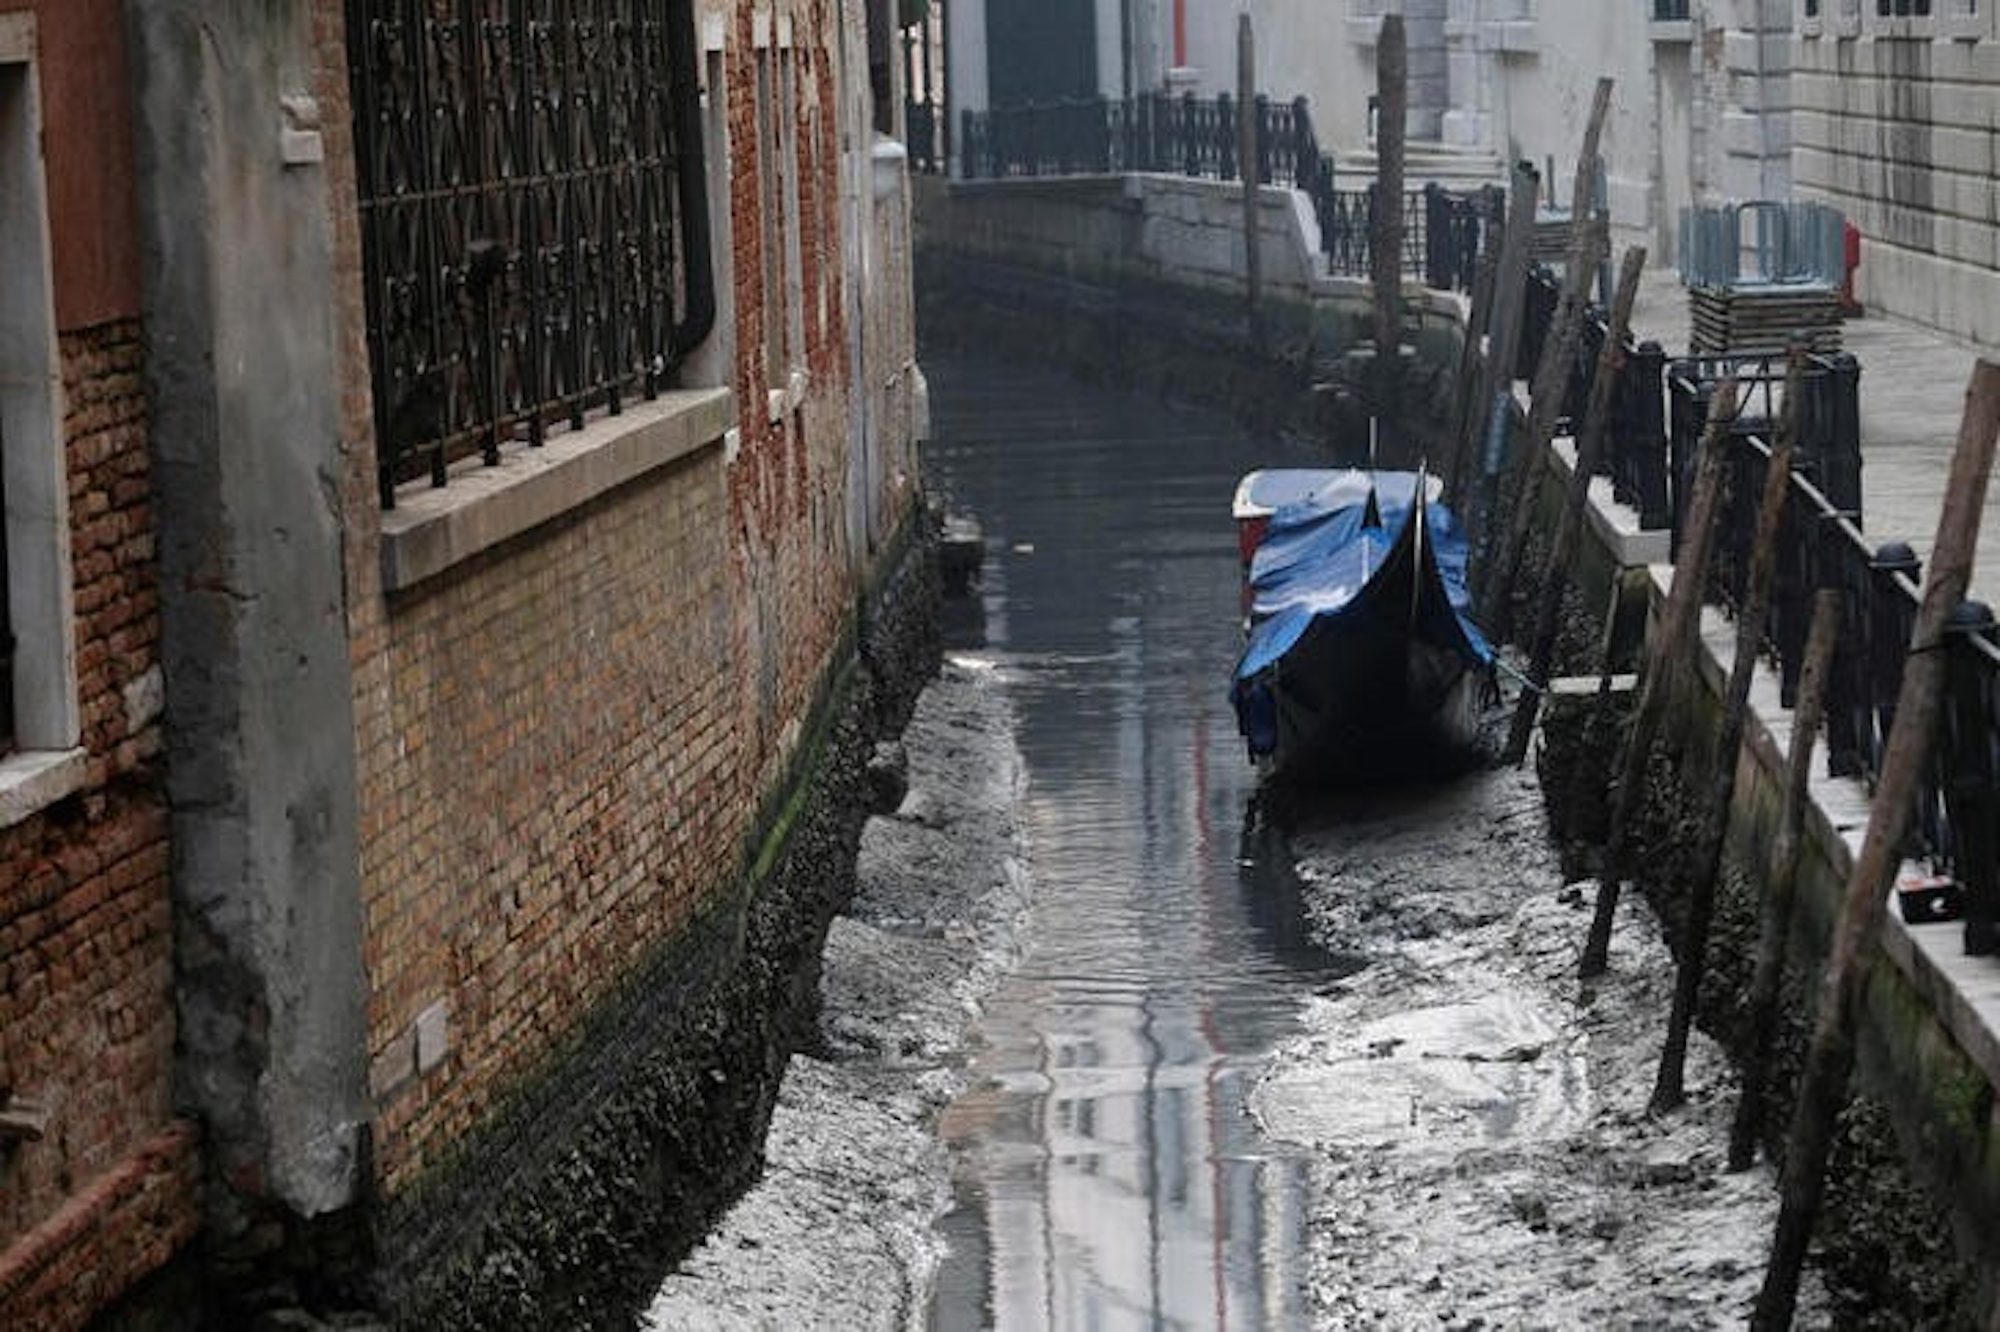 A gondola is pictured in a canal during a severe low tide in the lagoon city of Venice, Italy, February 17, 2023. REUTERS/Manuel Silvestri 